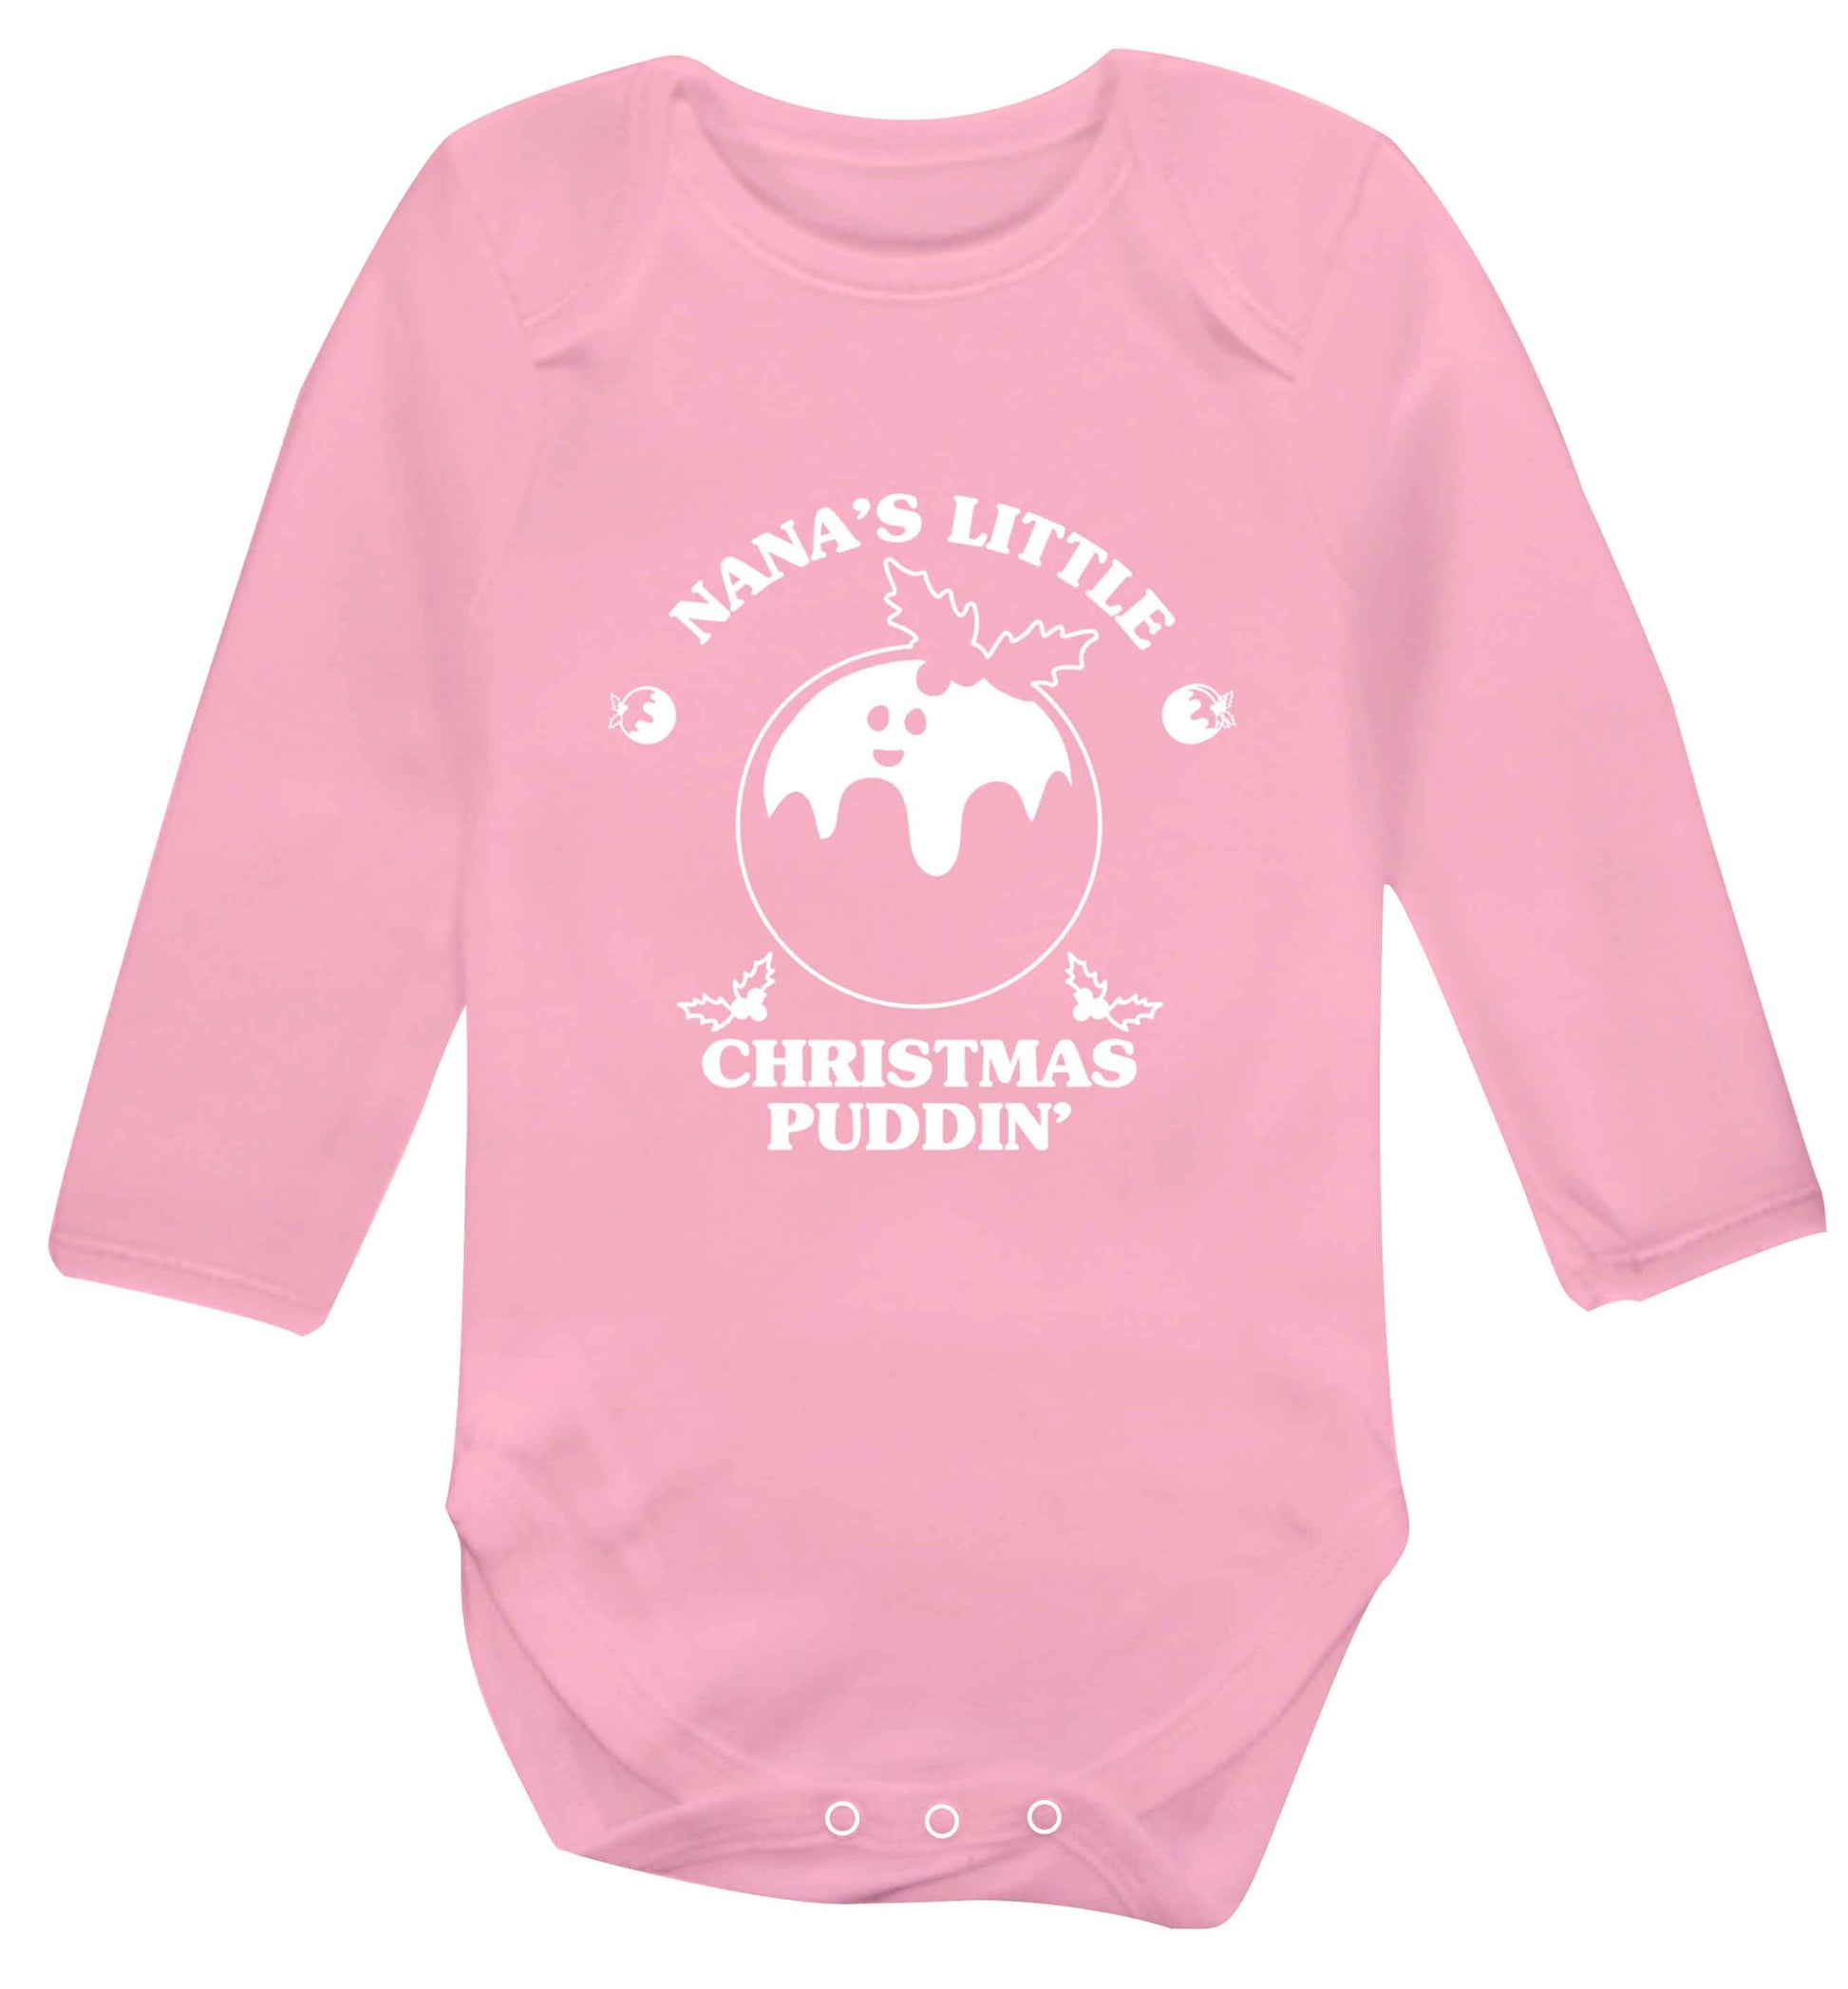 Nana's little Christmas puddin' Baby Vest long sleeved pale pink 6-12 months